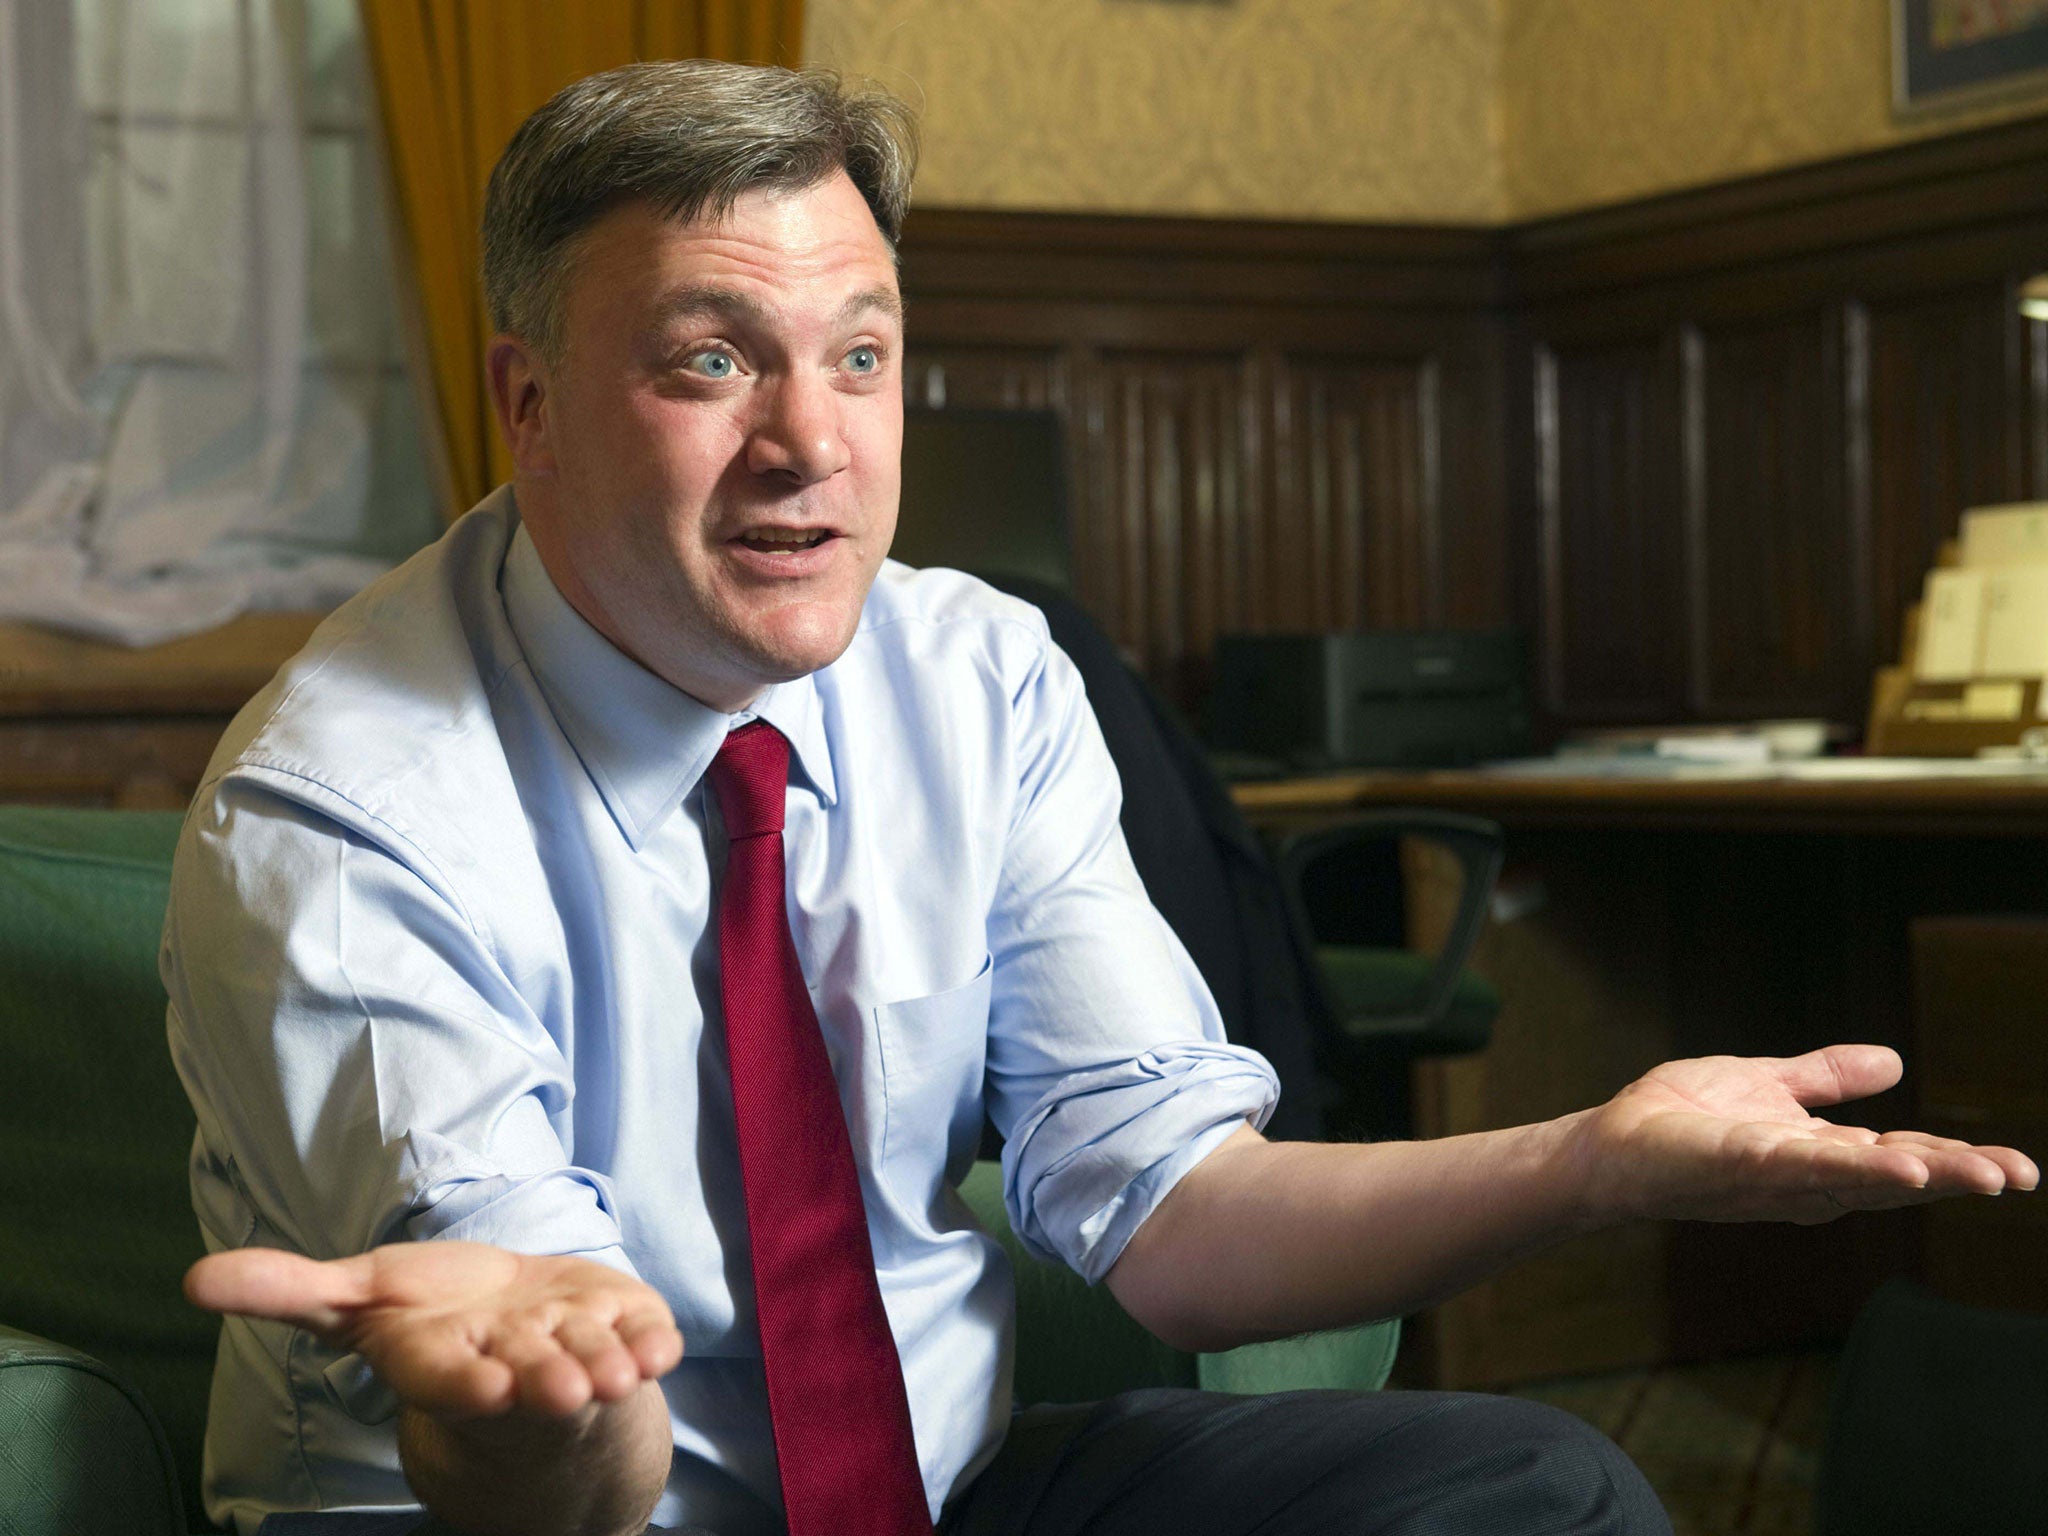 Ed Balls: 'This dodgy Tory dossier is riddled with untruths and errors on every page'